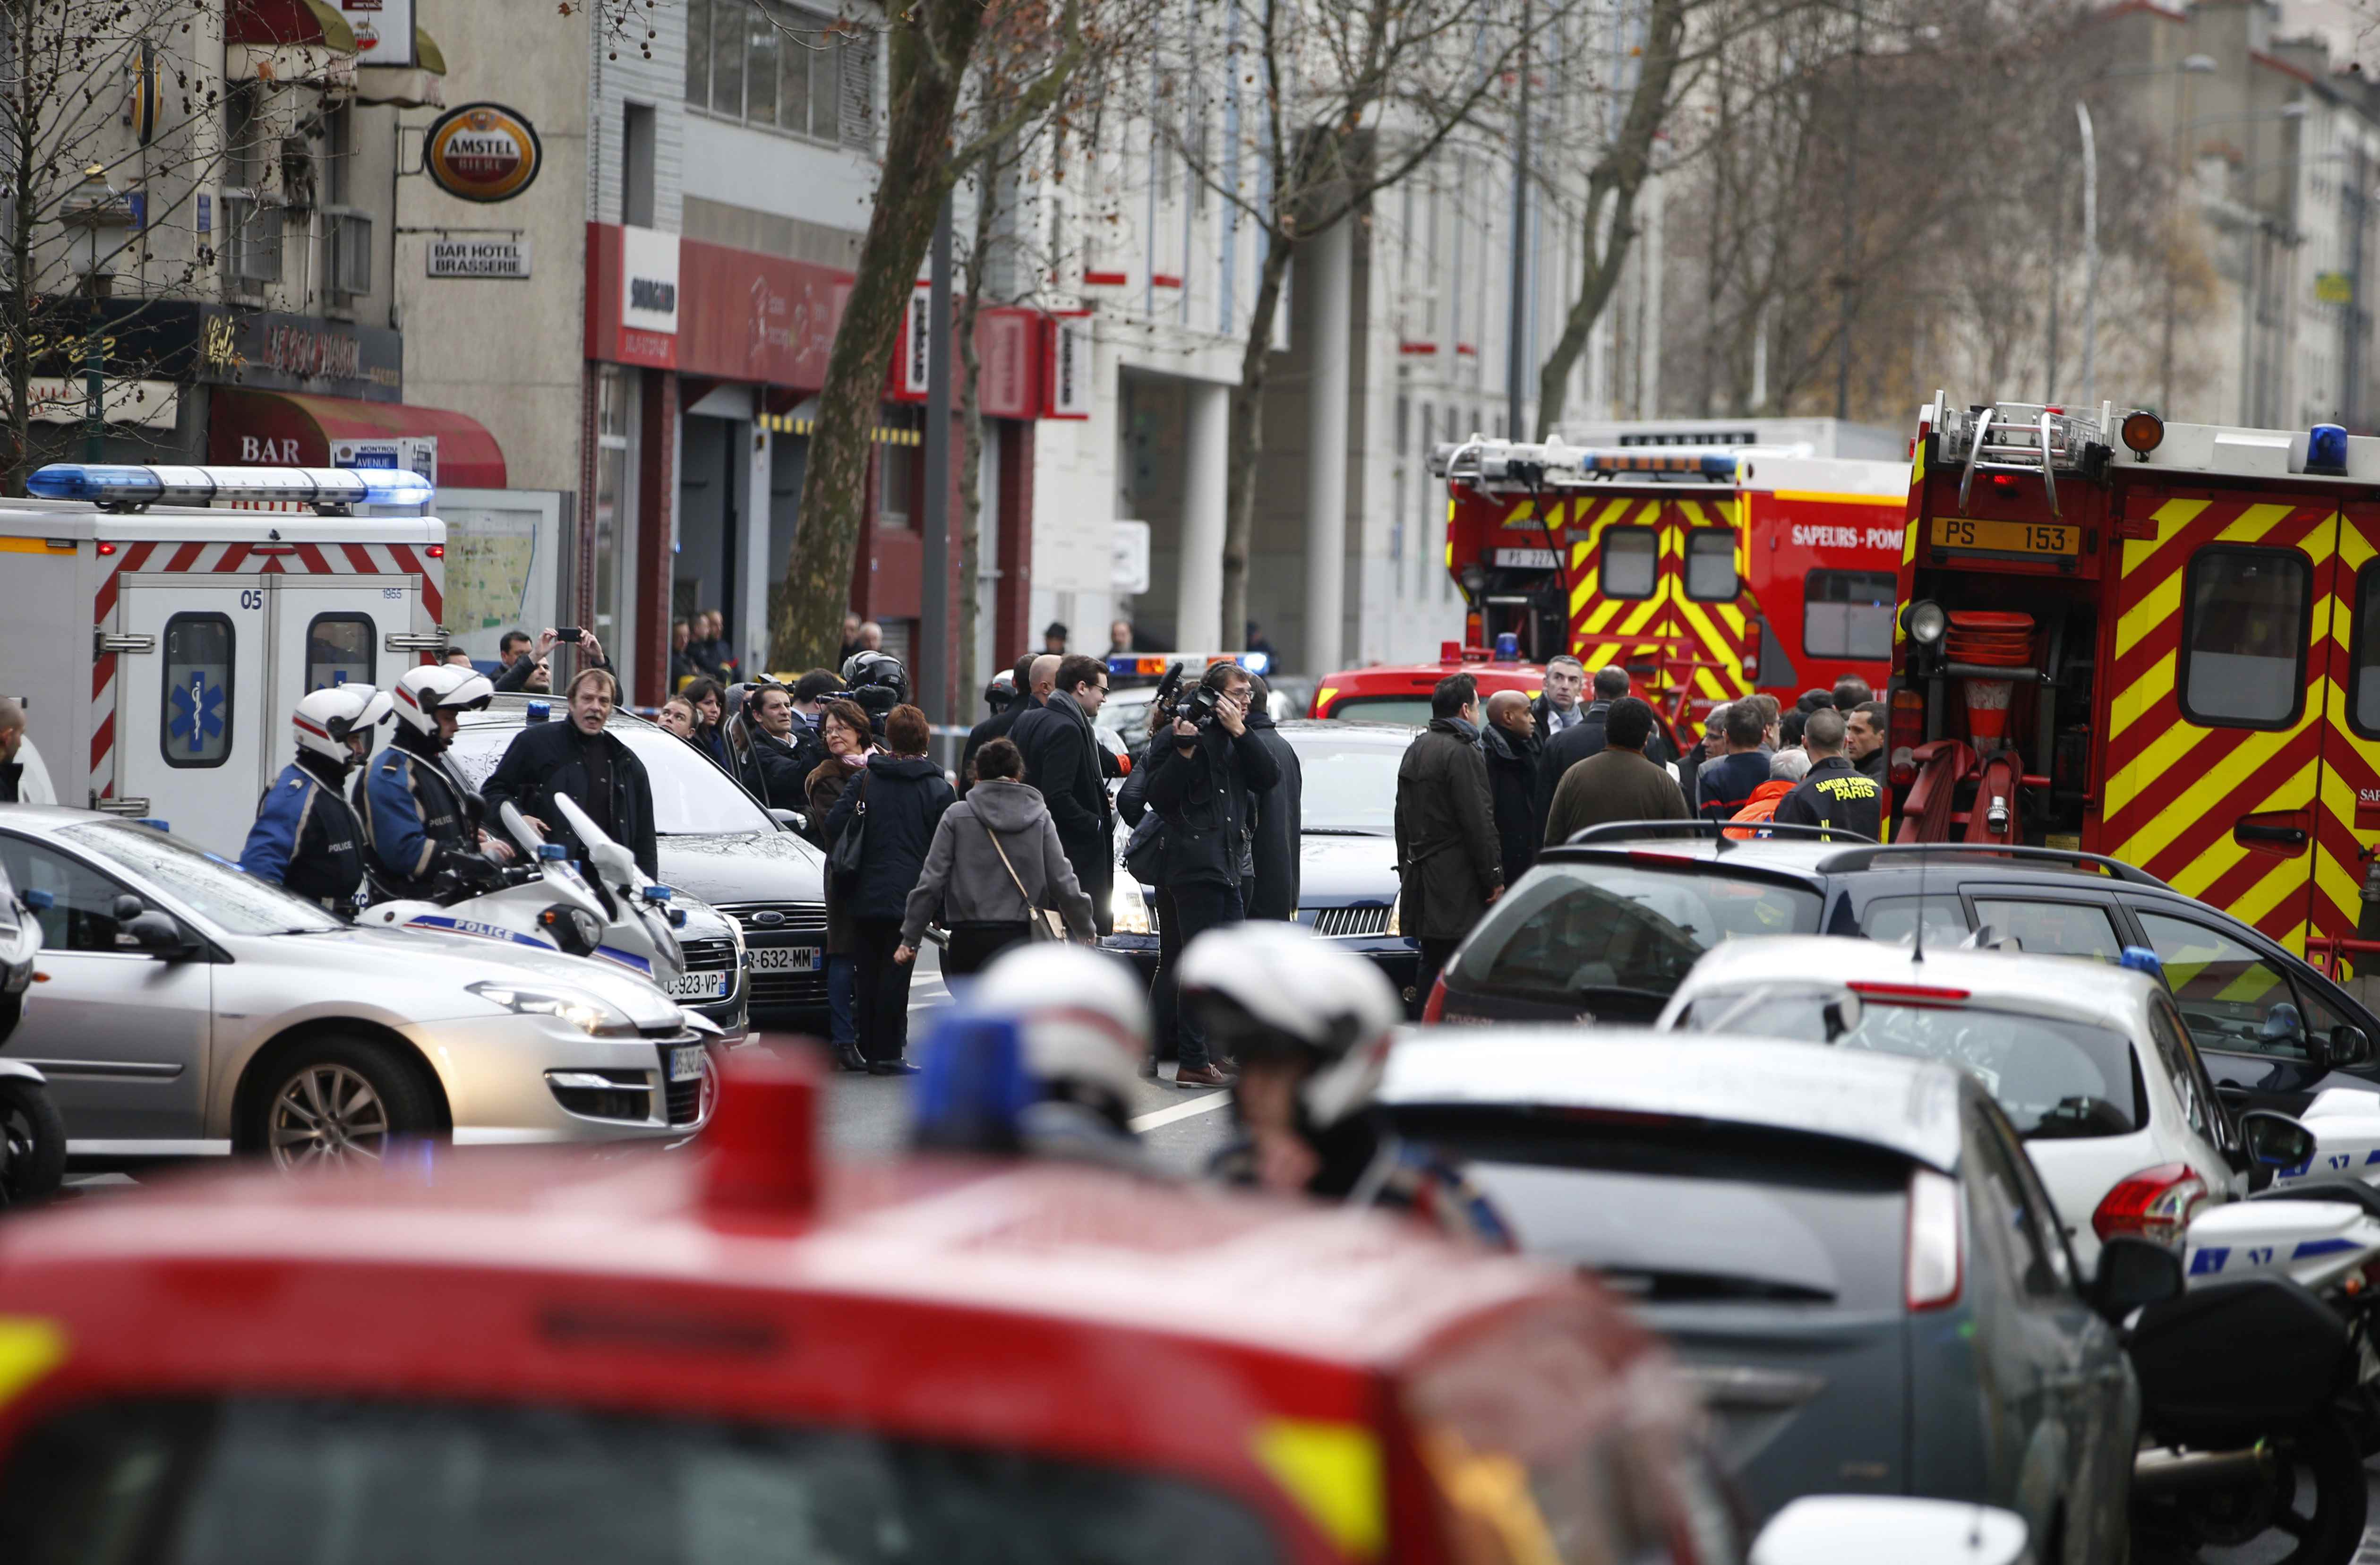 General view of police and rescue crews after a shooting in the street of Montrouge near Paris January 8, 2015. A police officer was wounded in a shootout in southern Paris on Thursday, a police source told Reuters, adding that it was unclear at this stage whether there was any link to the killings at the Charlie Hebdo magazine.Television station iTELE said two police officers were lying on the ground after the attack. REUTERS/Charles Platiau (FRANCE - Tags: CRIME LAW)